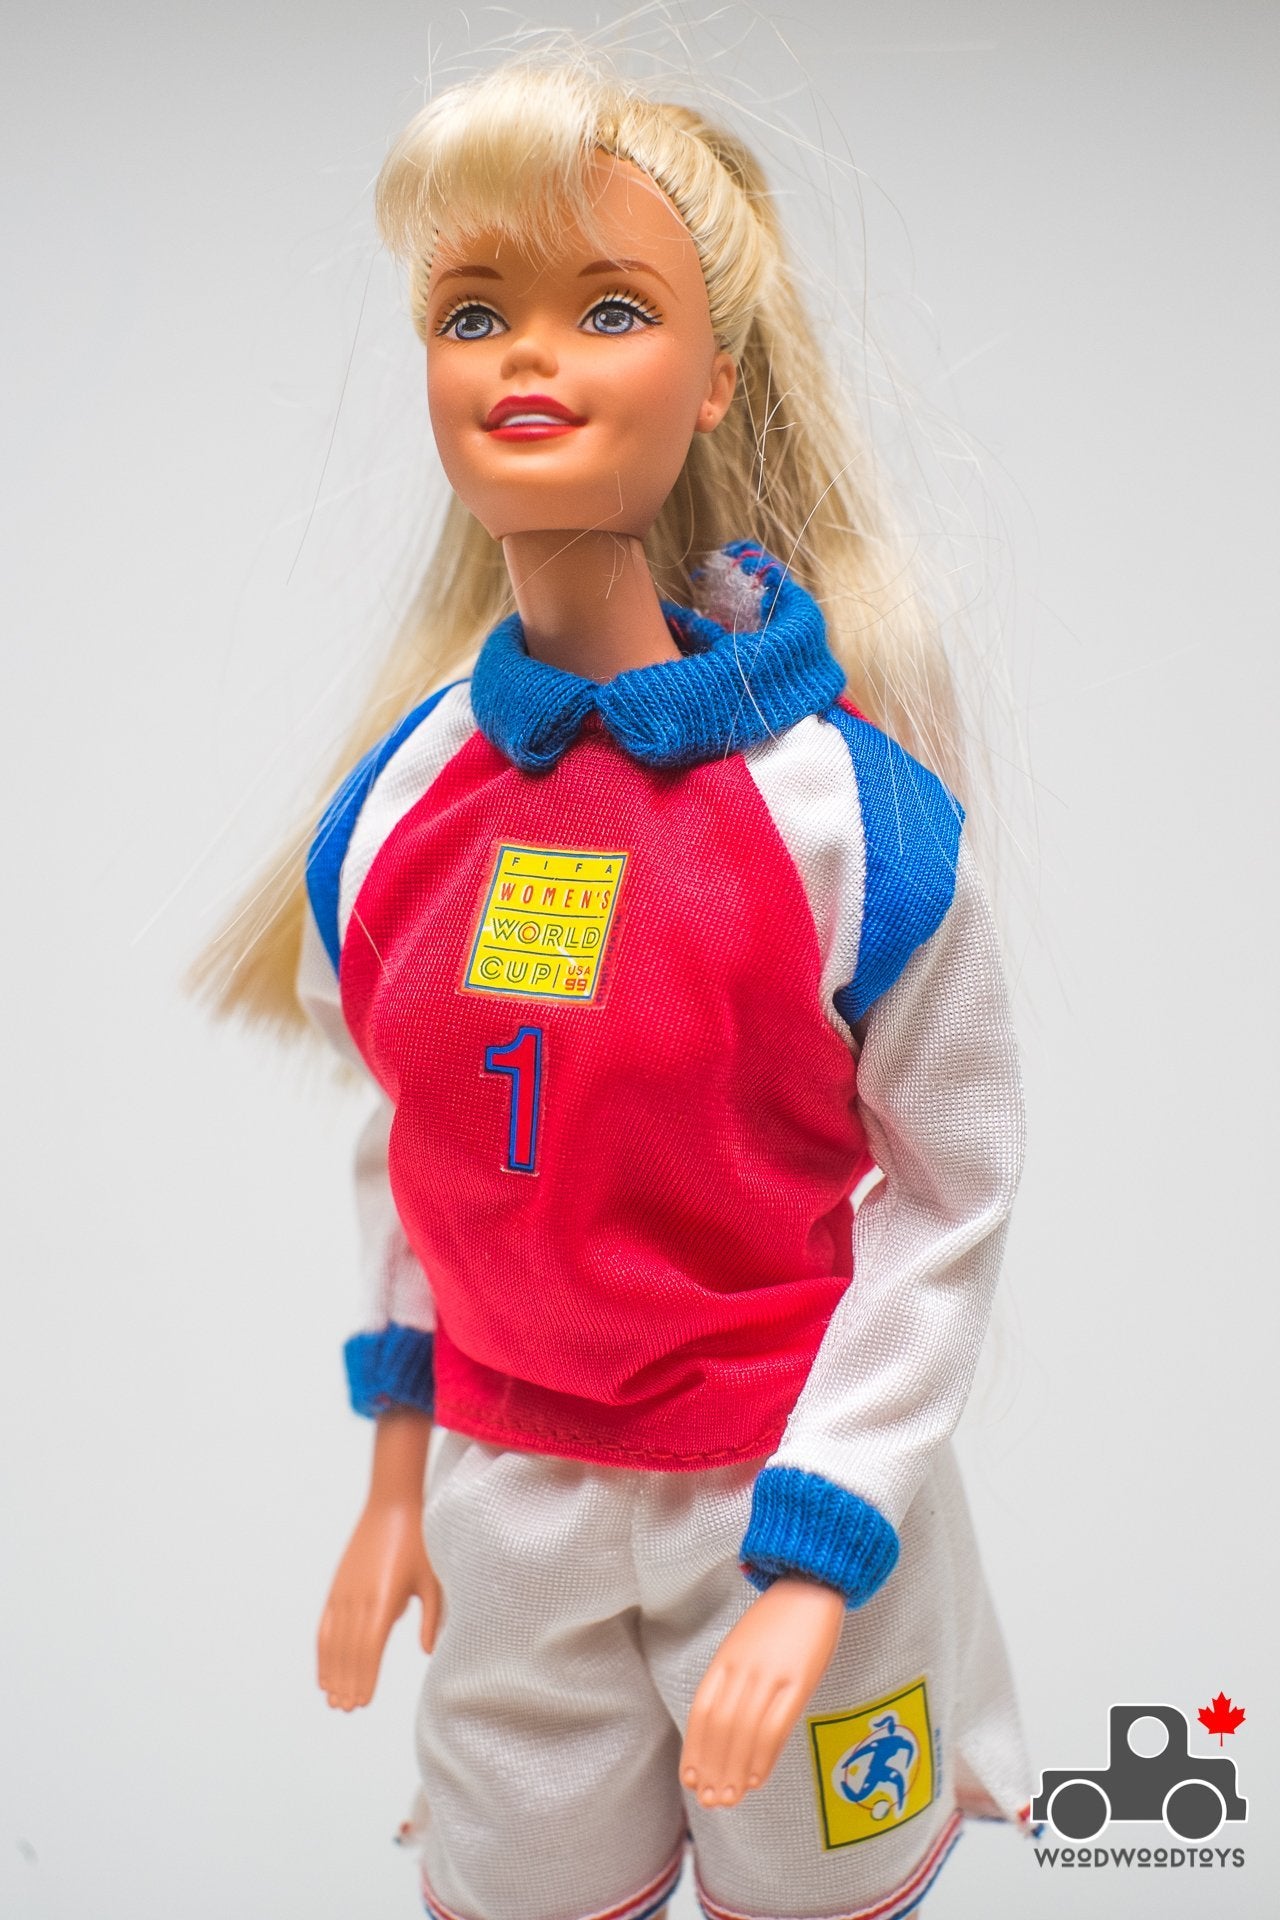 Soccer Barbie Doll 1999 USA FIFA Women World Cup Mia Hamm - Wood Wood Toys Canada's Favourite Montessori Toy Store